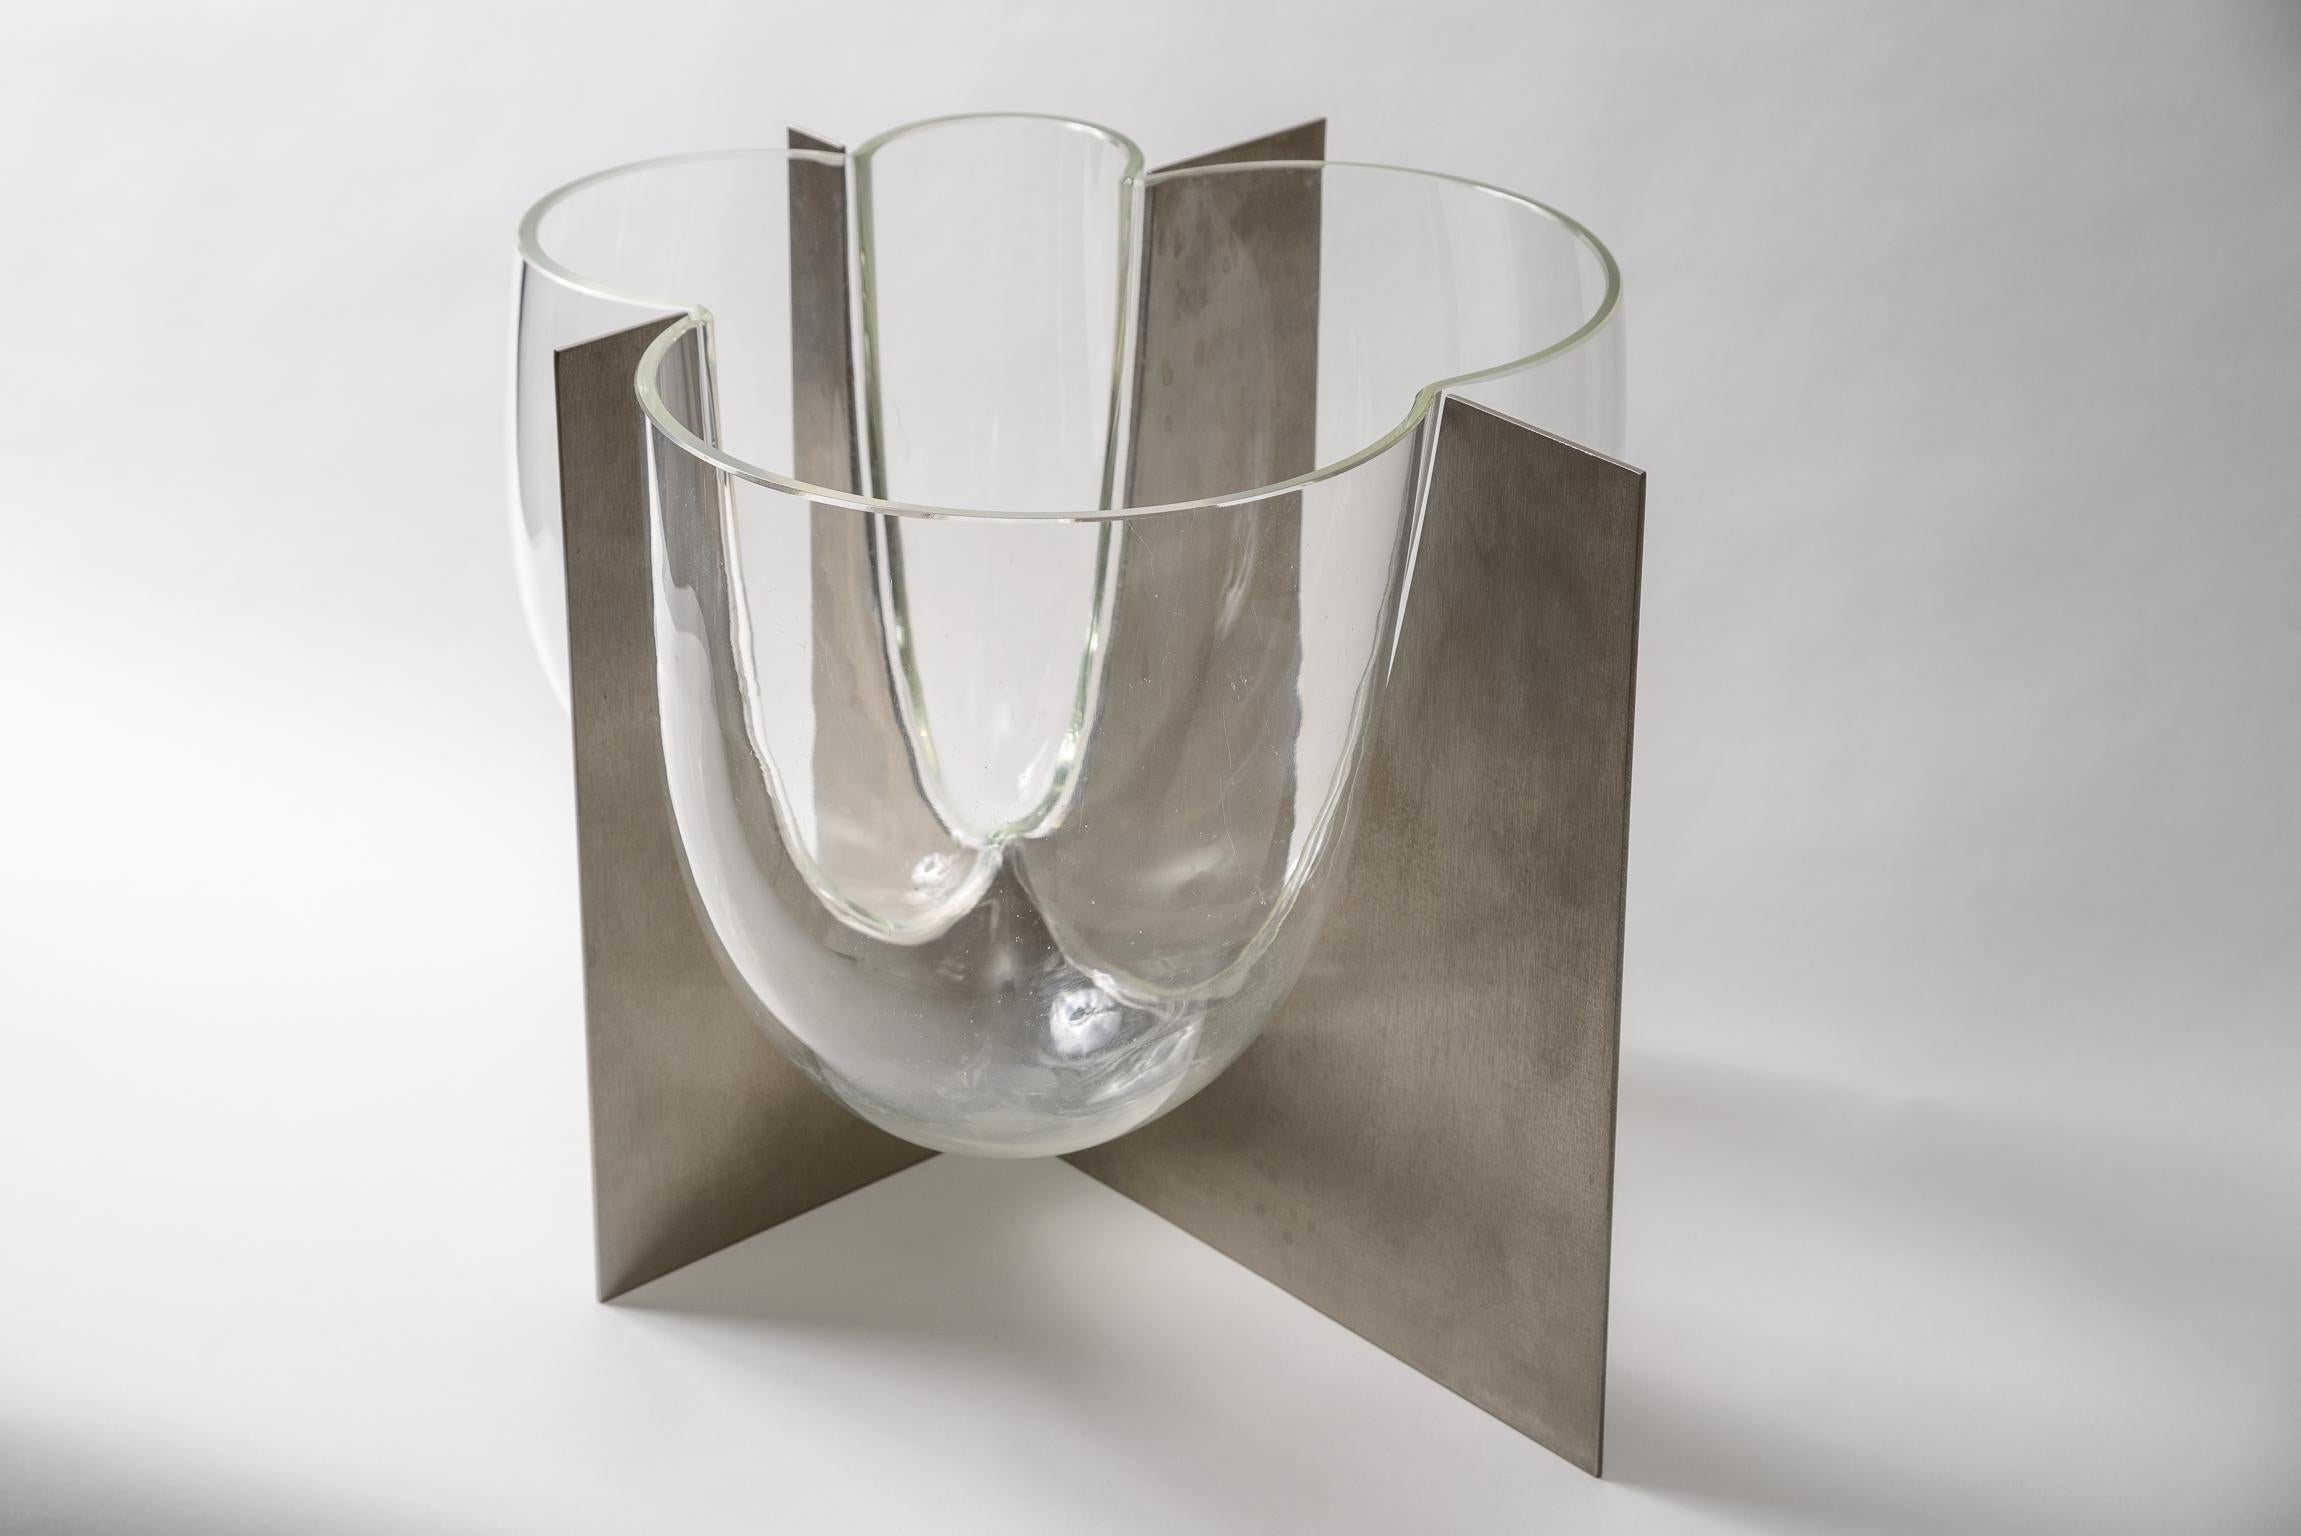 Carlo Nason polished aluminum and blown glass vase
An icon of 1970s design